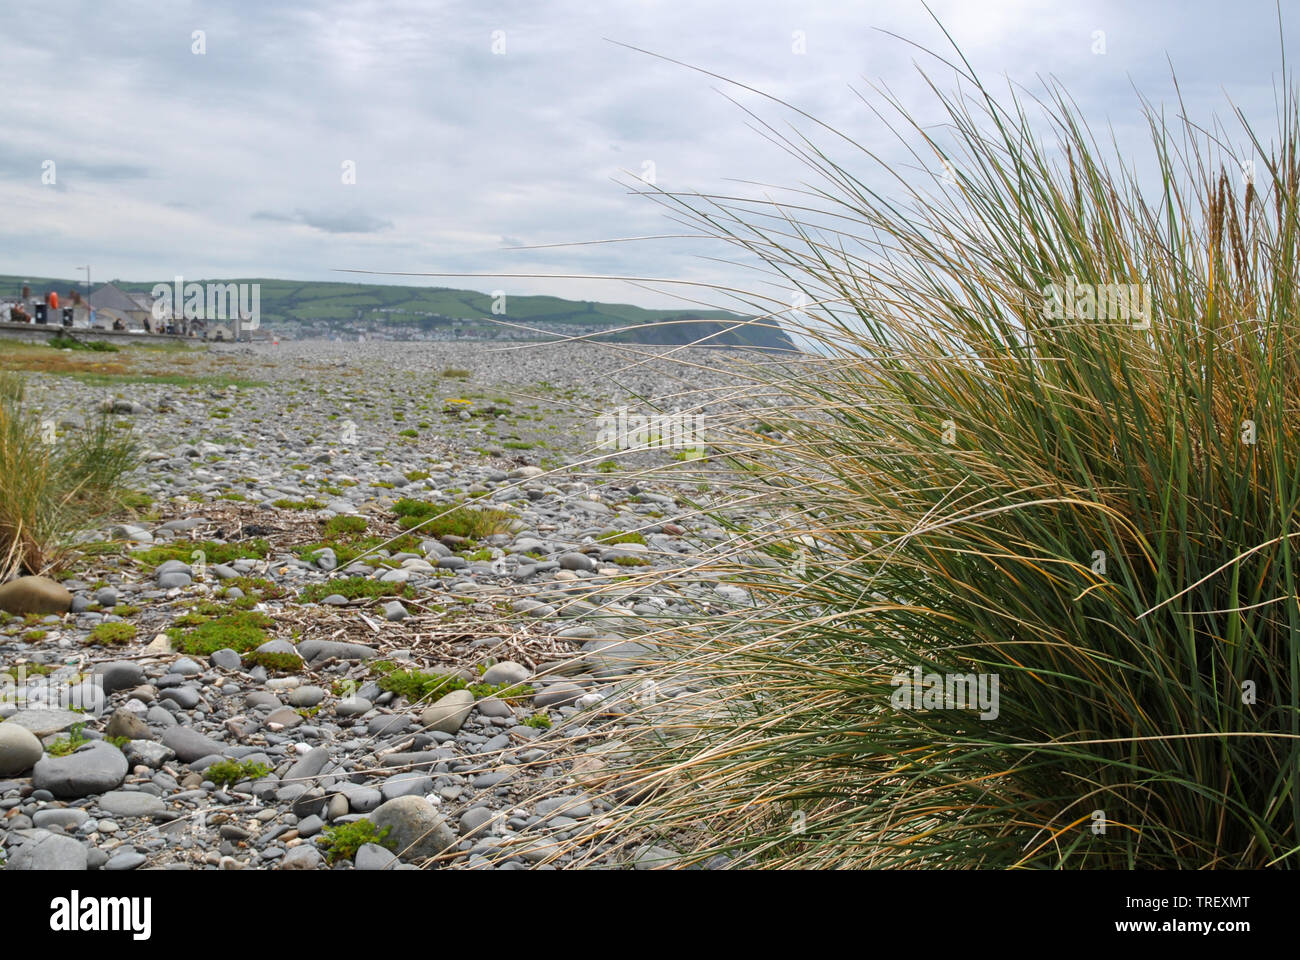 A photograph showing a pebbly beach scene in Borth with marram grass in the foreground and cliffs in the background Stock Photo